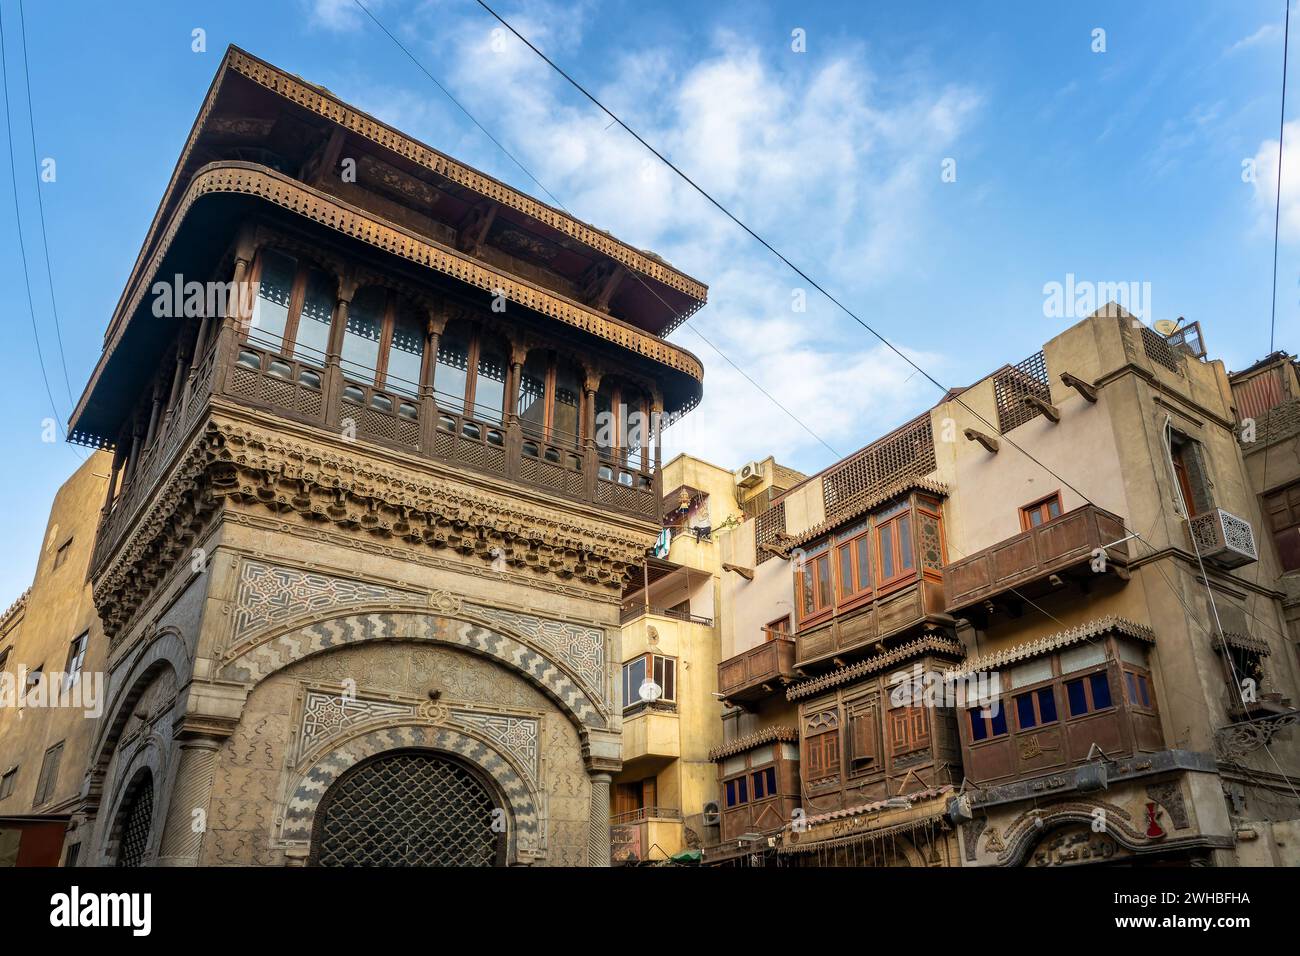 Sabil Kuttab (meaning fountain and school) of Katkhuda, medieval building in the famous El Moez street, Old Cairo, Egypt Stock Photo